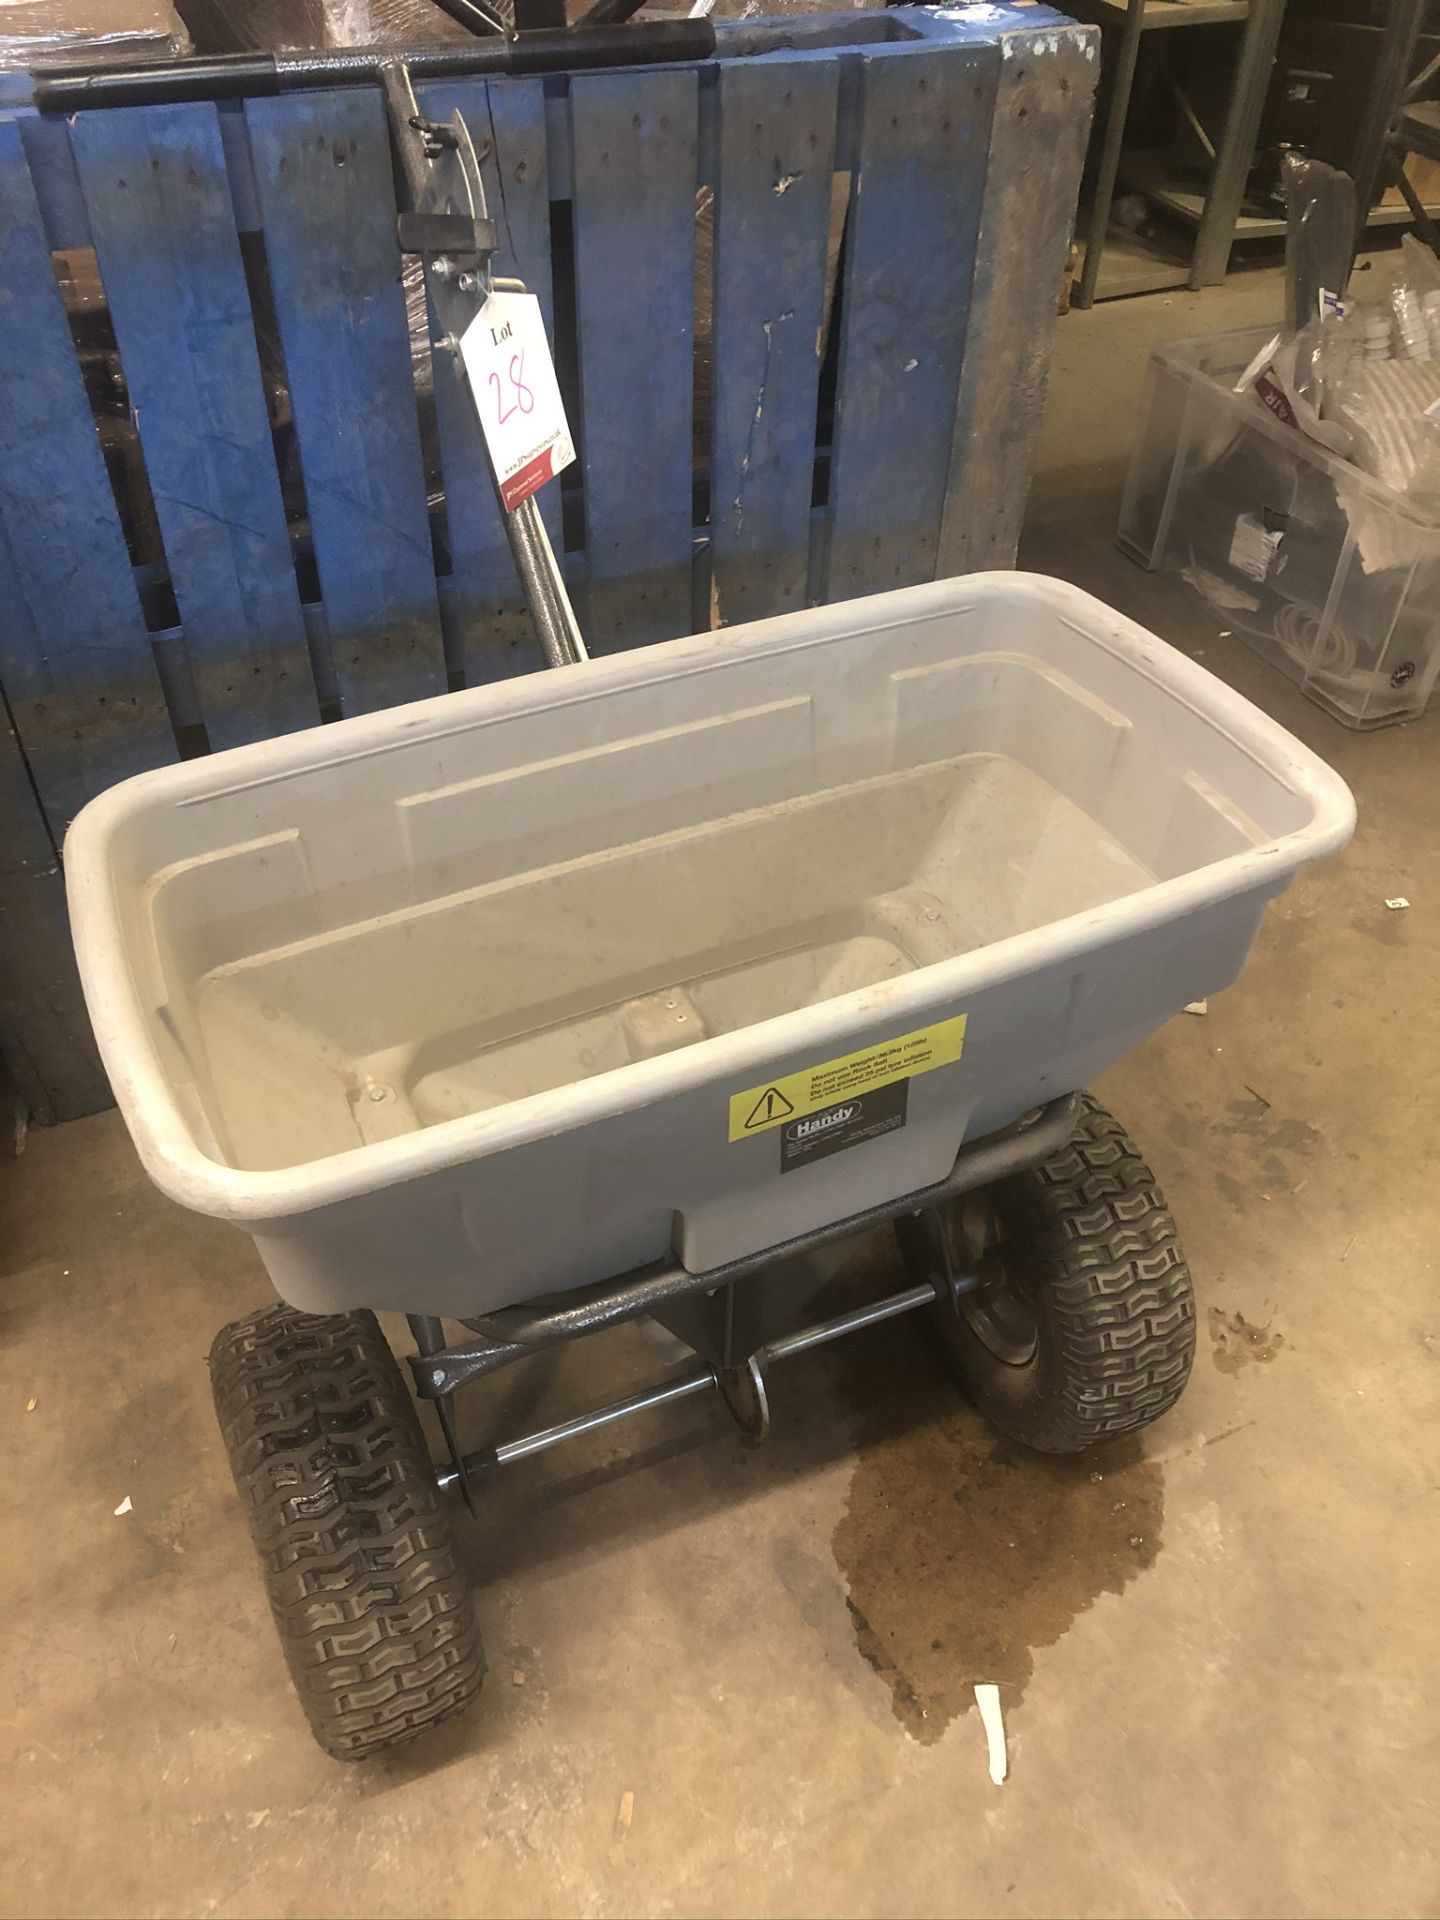 TheHandy 56.8KG Push Along Spreader